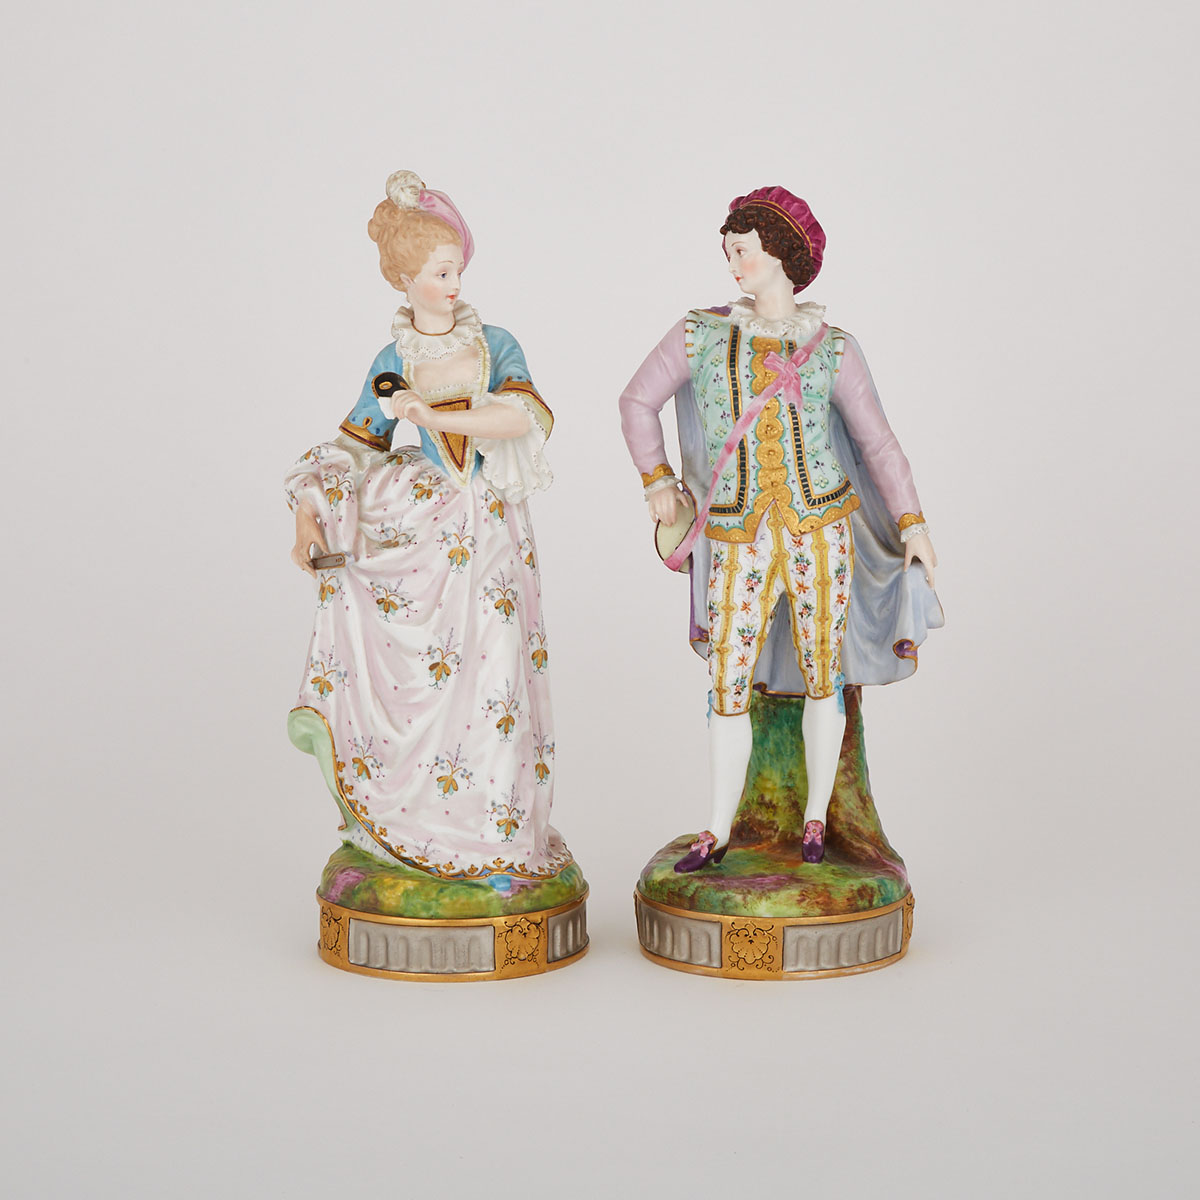 Pair of French Porcelain Figures of a Lady and Musician, late 19th century